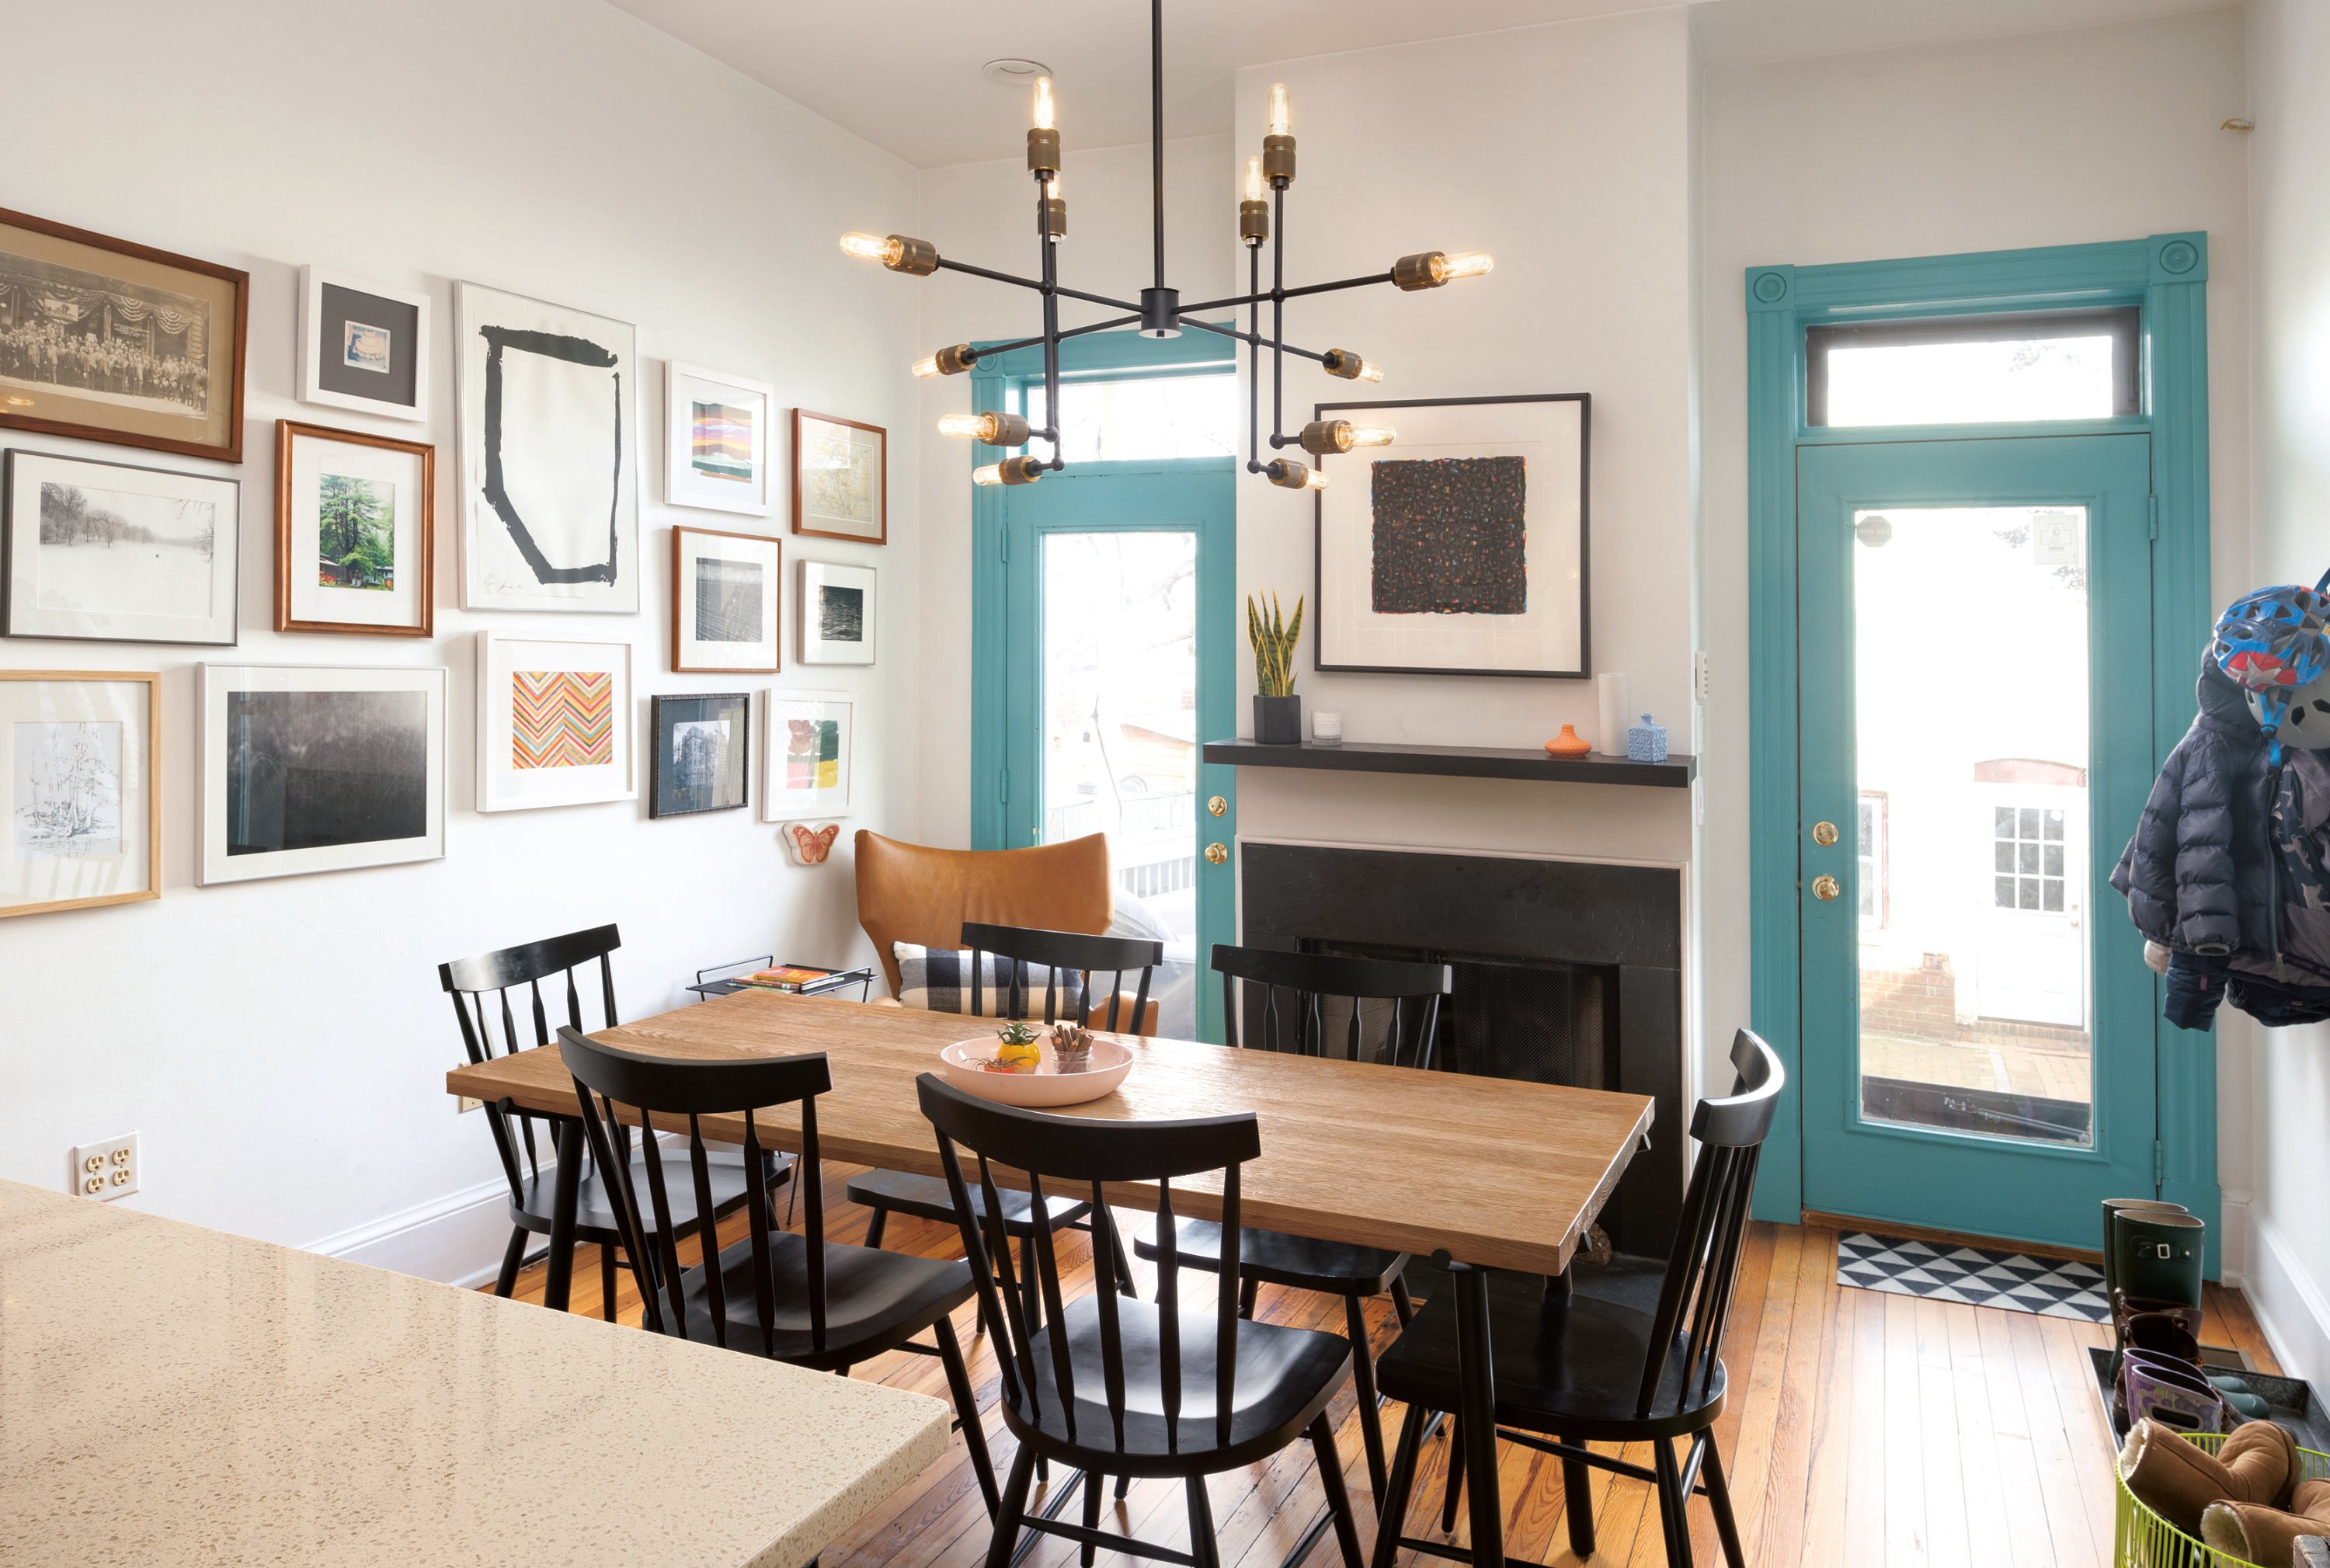 Quick Trick: Painting the original trimwork in the kitchen, a shade of bright aqua helps it stand out and look fresh. Photograph by Jenn Verrier Photography.